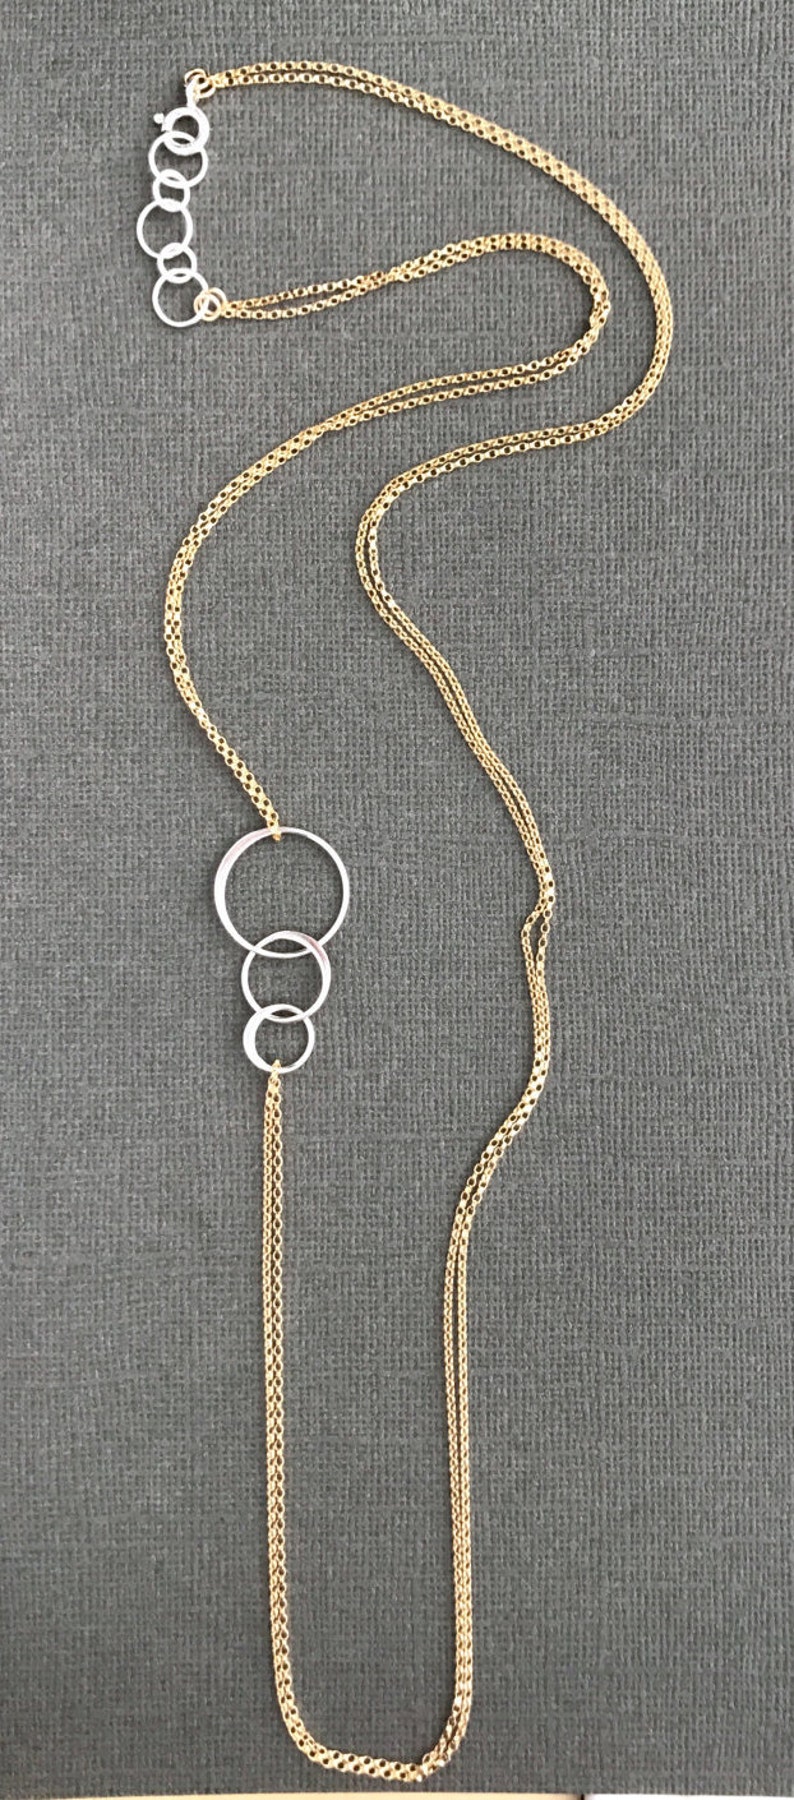 Three Circle Necklace Gold Filled Chain 3 Circles - Etsy